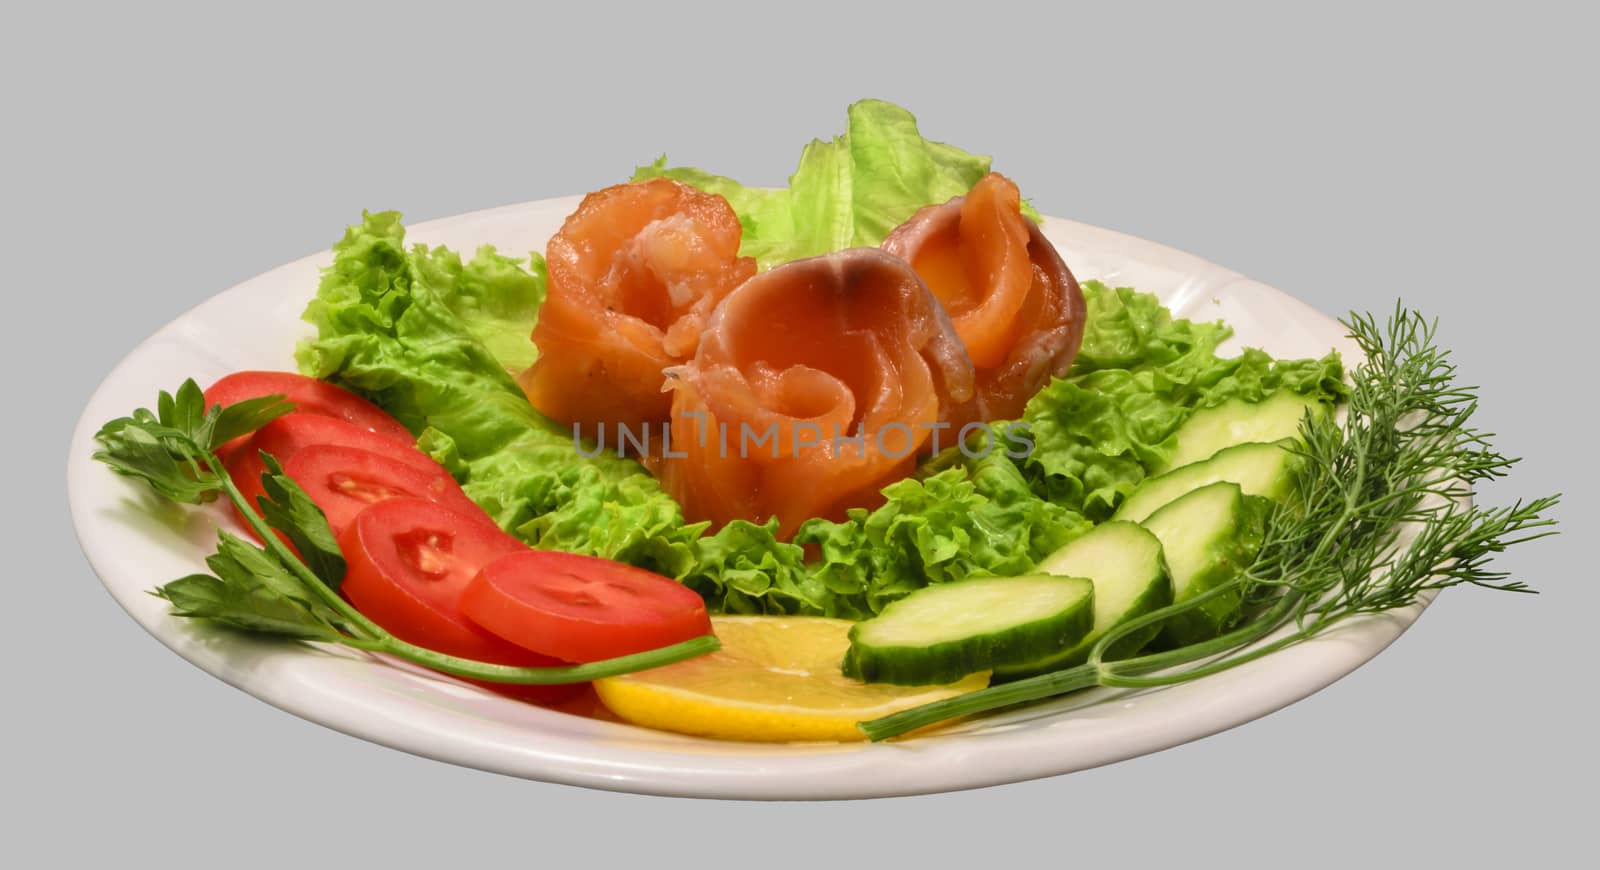 Rolls of red fish fillet with vegetables on the white plate. Isolated on the gray background.